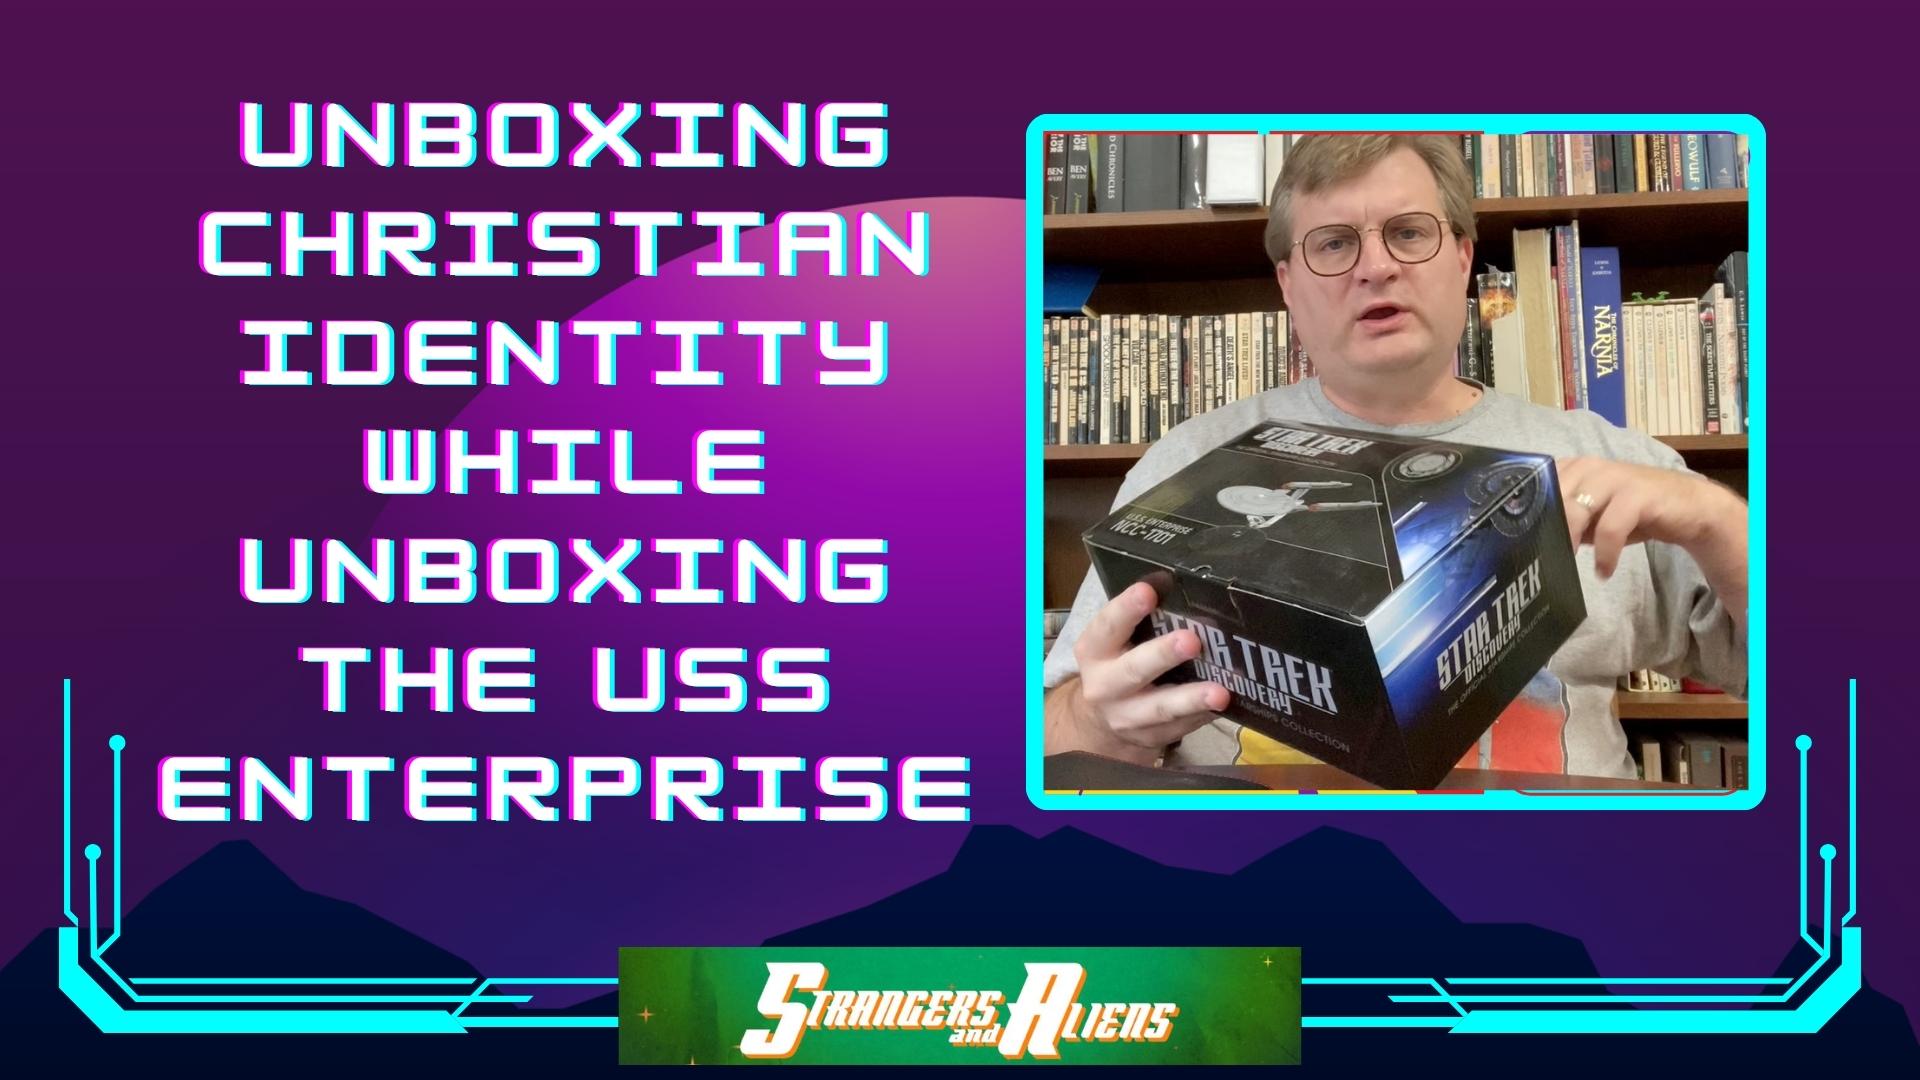 “Unboxing Our Identity in Christ while Unboxing the USS Enterprise”: SCI-FI DEVOS (Weak Connections)￼